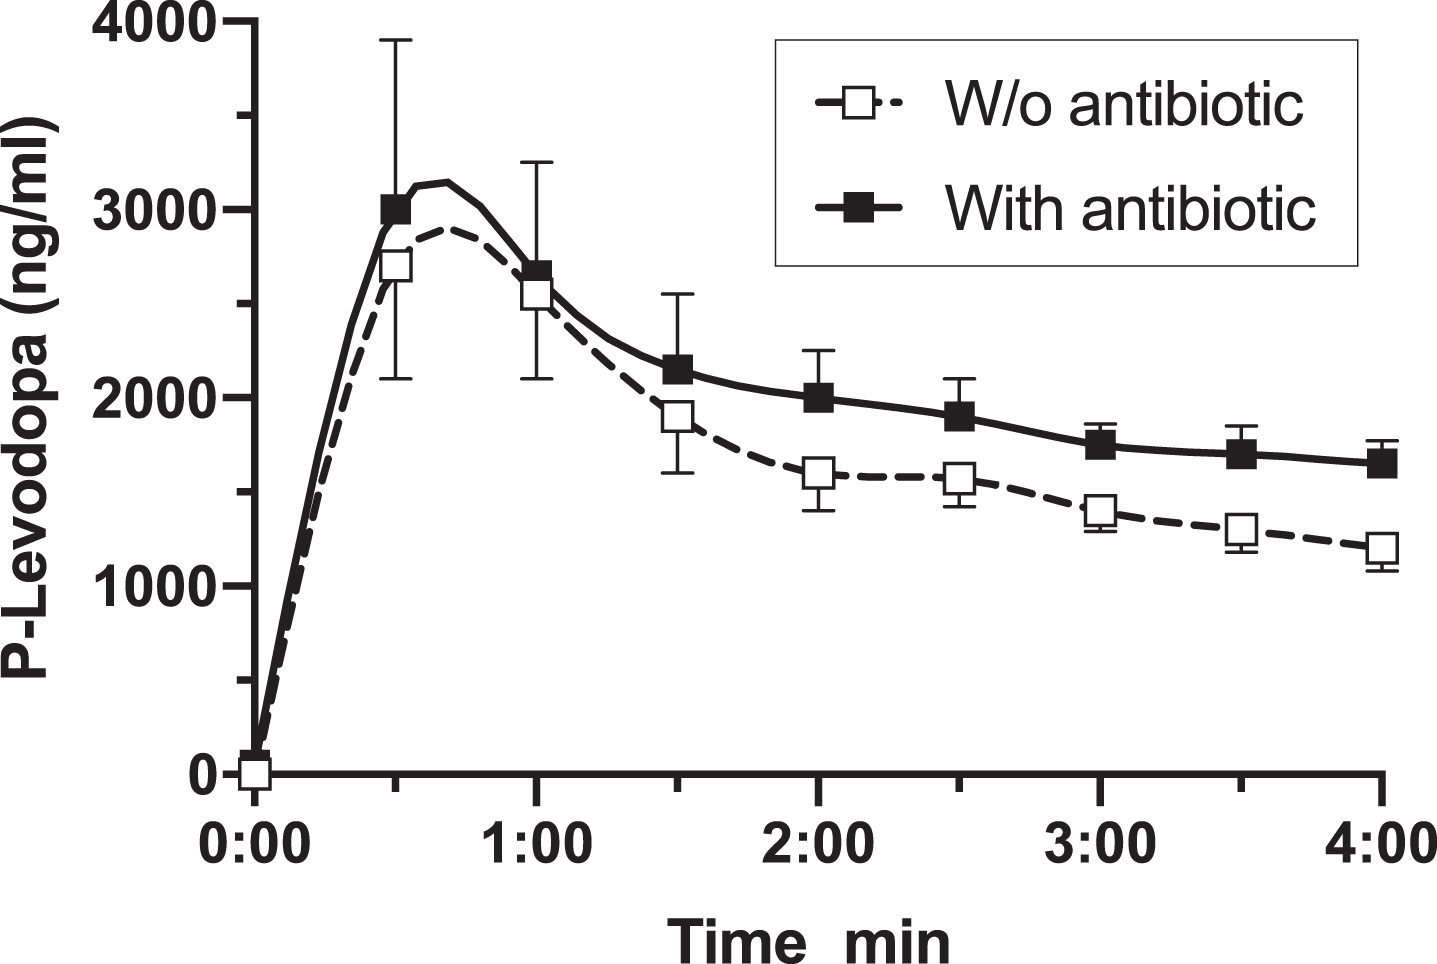 Pharmacokinetic model of levodopa plasma concentrations after oral administration of 250 mg levodopa with or w/o antibiotic treatment directed against Helicobacter pylori in Parkinsons’s disease patients (after reference [30]).